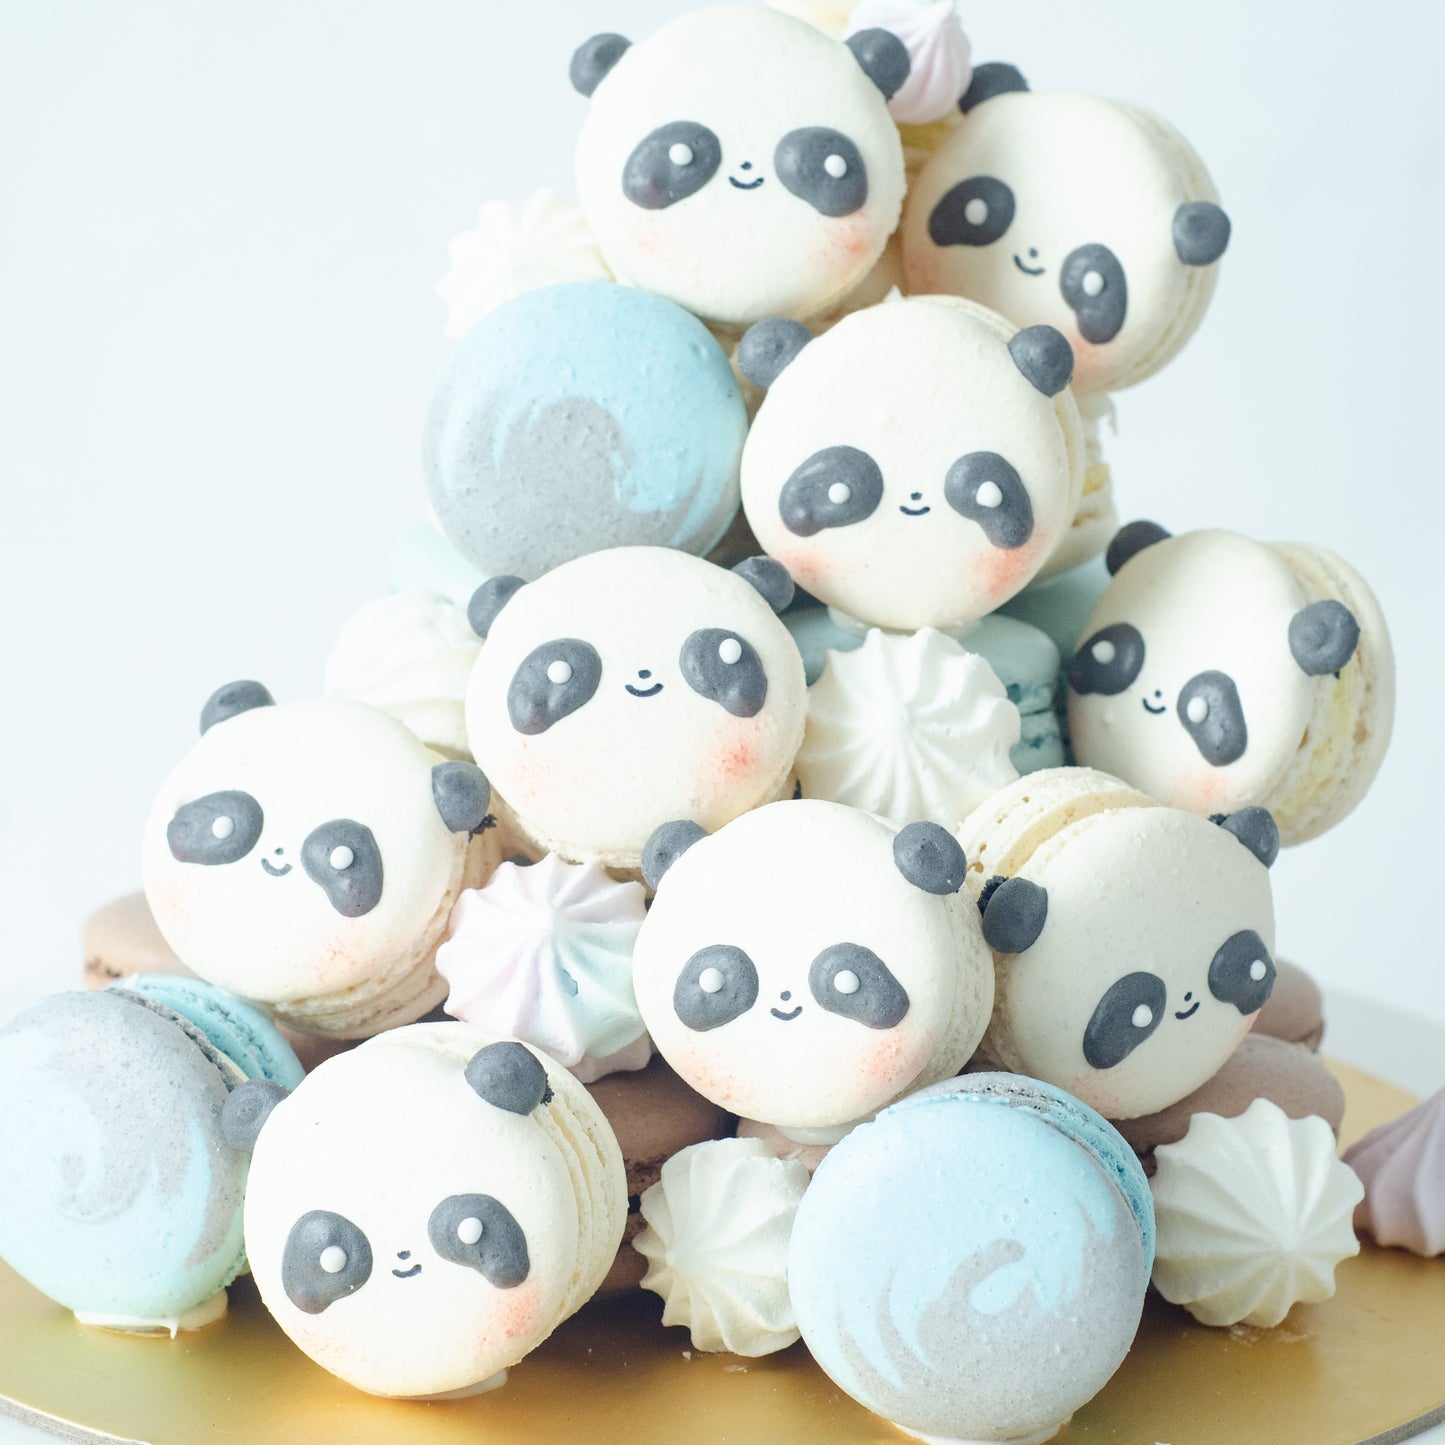 Panda Macaron Tower |  43pcs Macarons Total in a Tower | $138 Only!